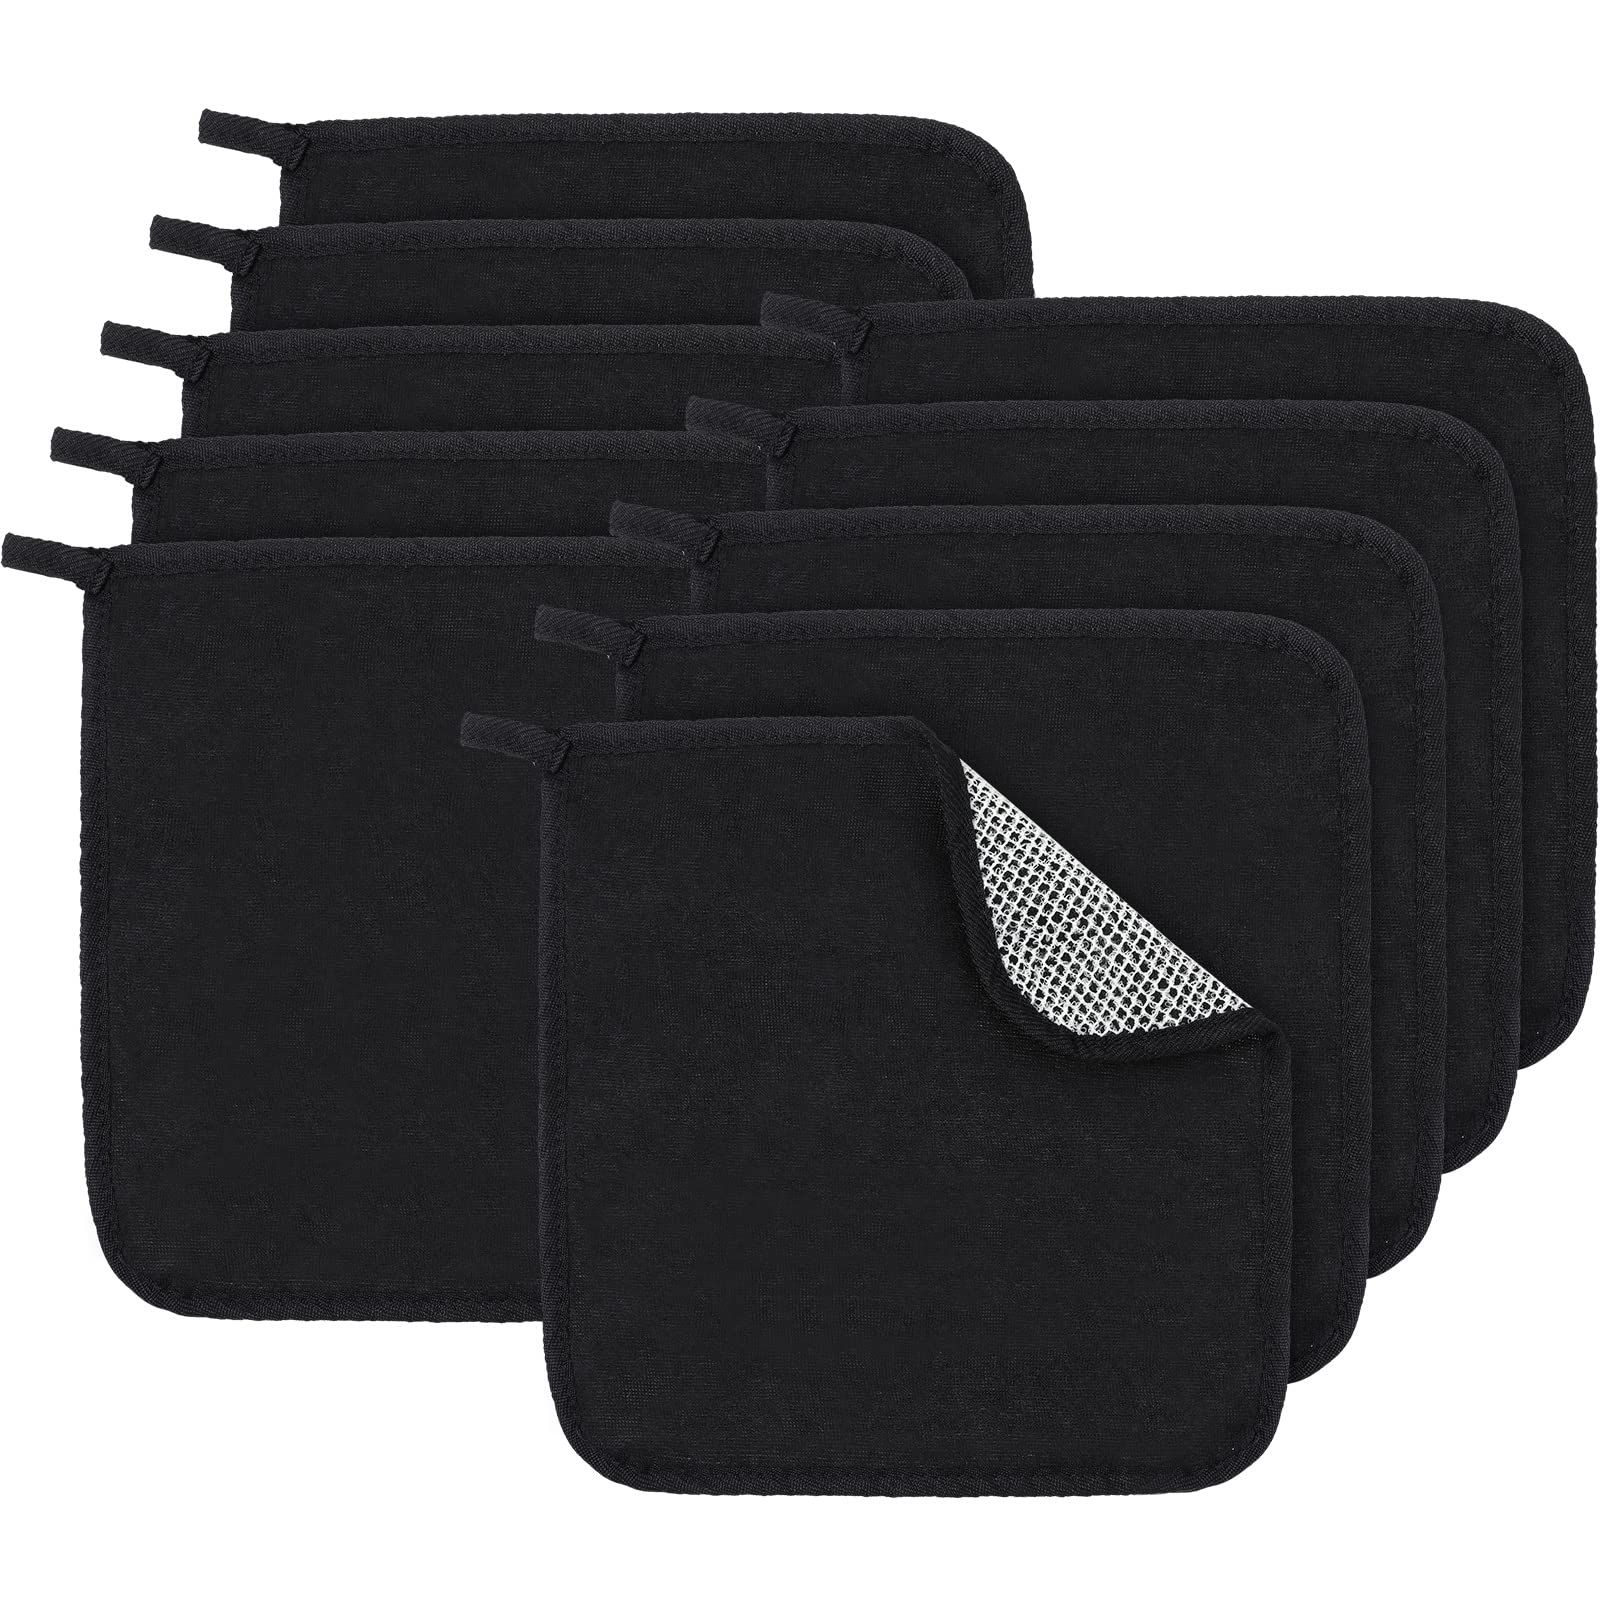 Tudomro 10 Pieces Double Sided Man Wash Cloths Bath Exfoliating Body Face  Washcloth Scrub Cloths Wipe Washcloths Towel for Body Shower for Men and  Women (Black 10 x 10 Inch) Black 10 Count (Pack of 1)